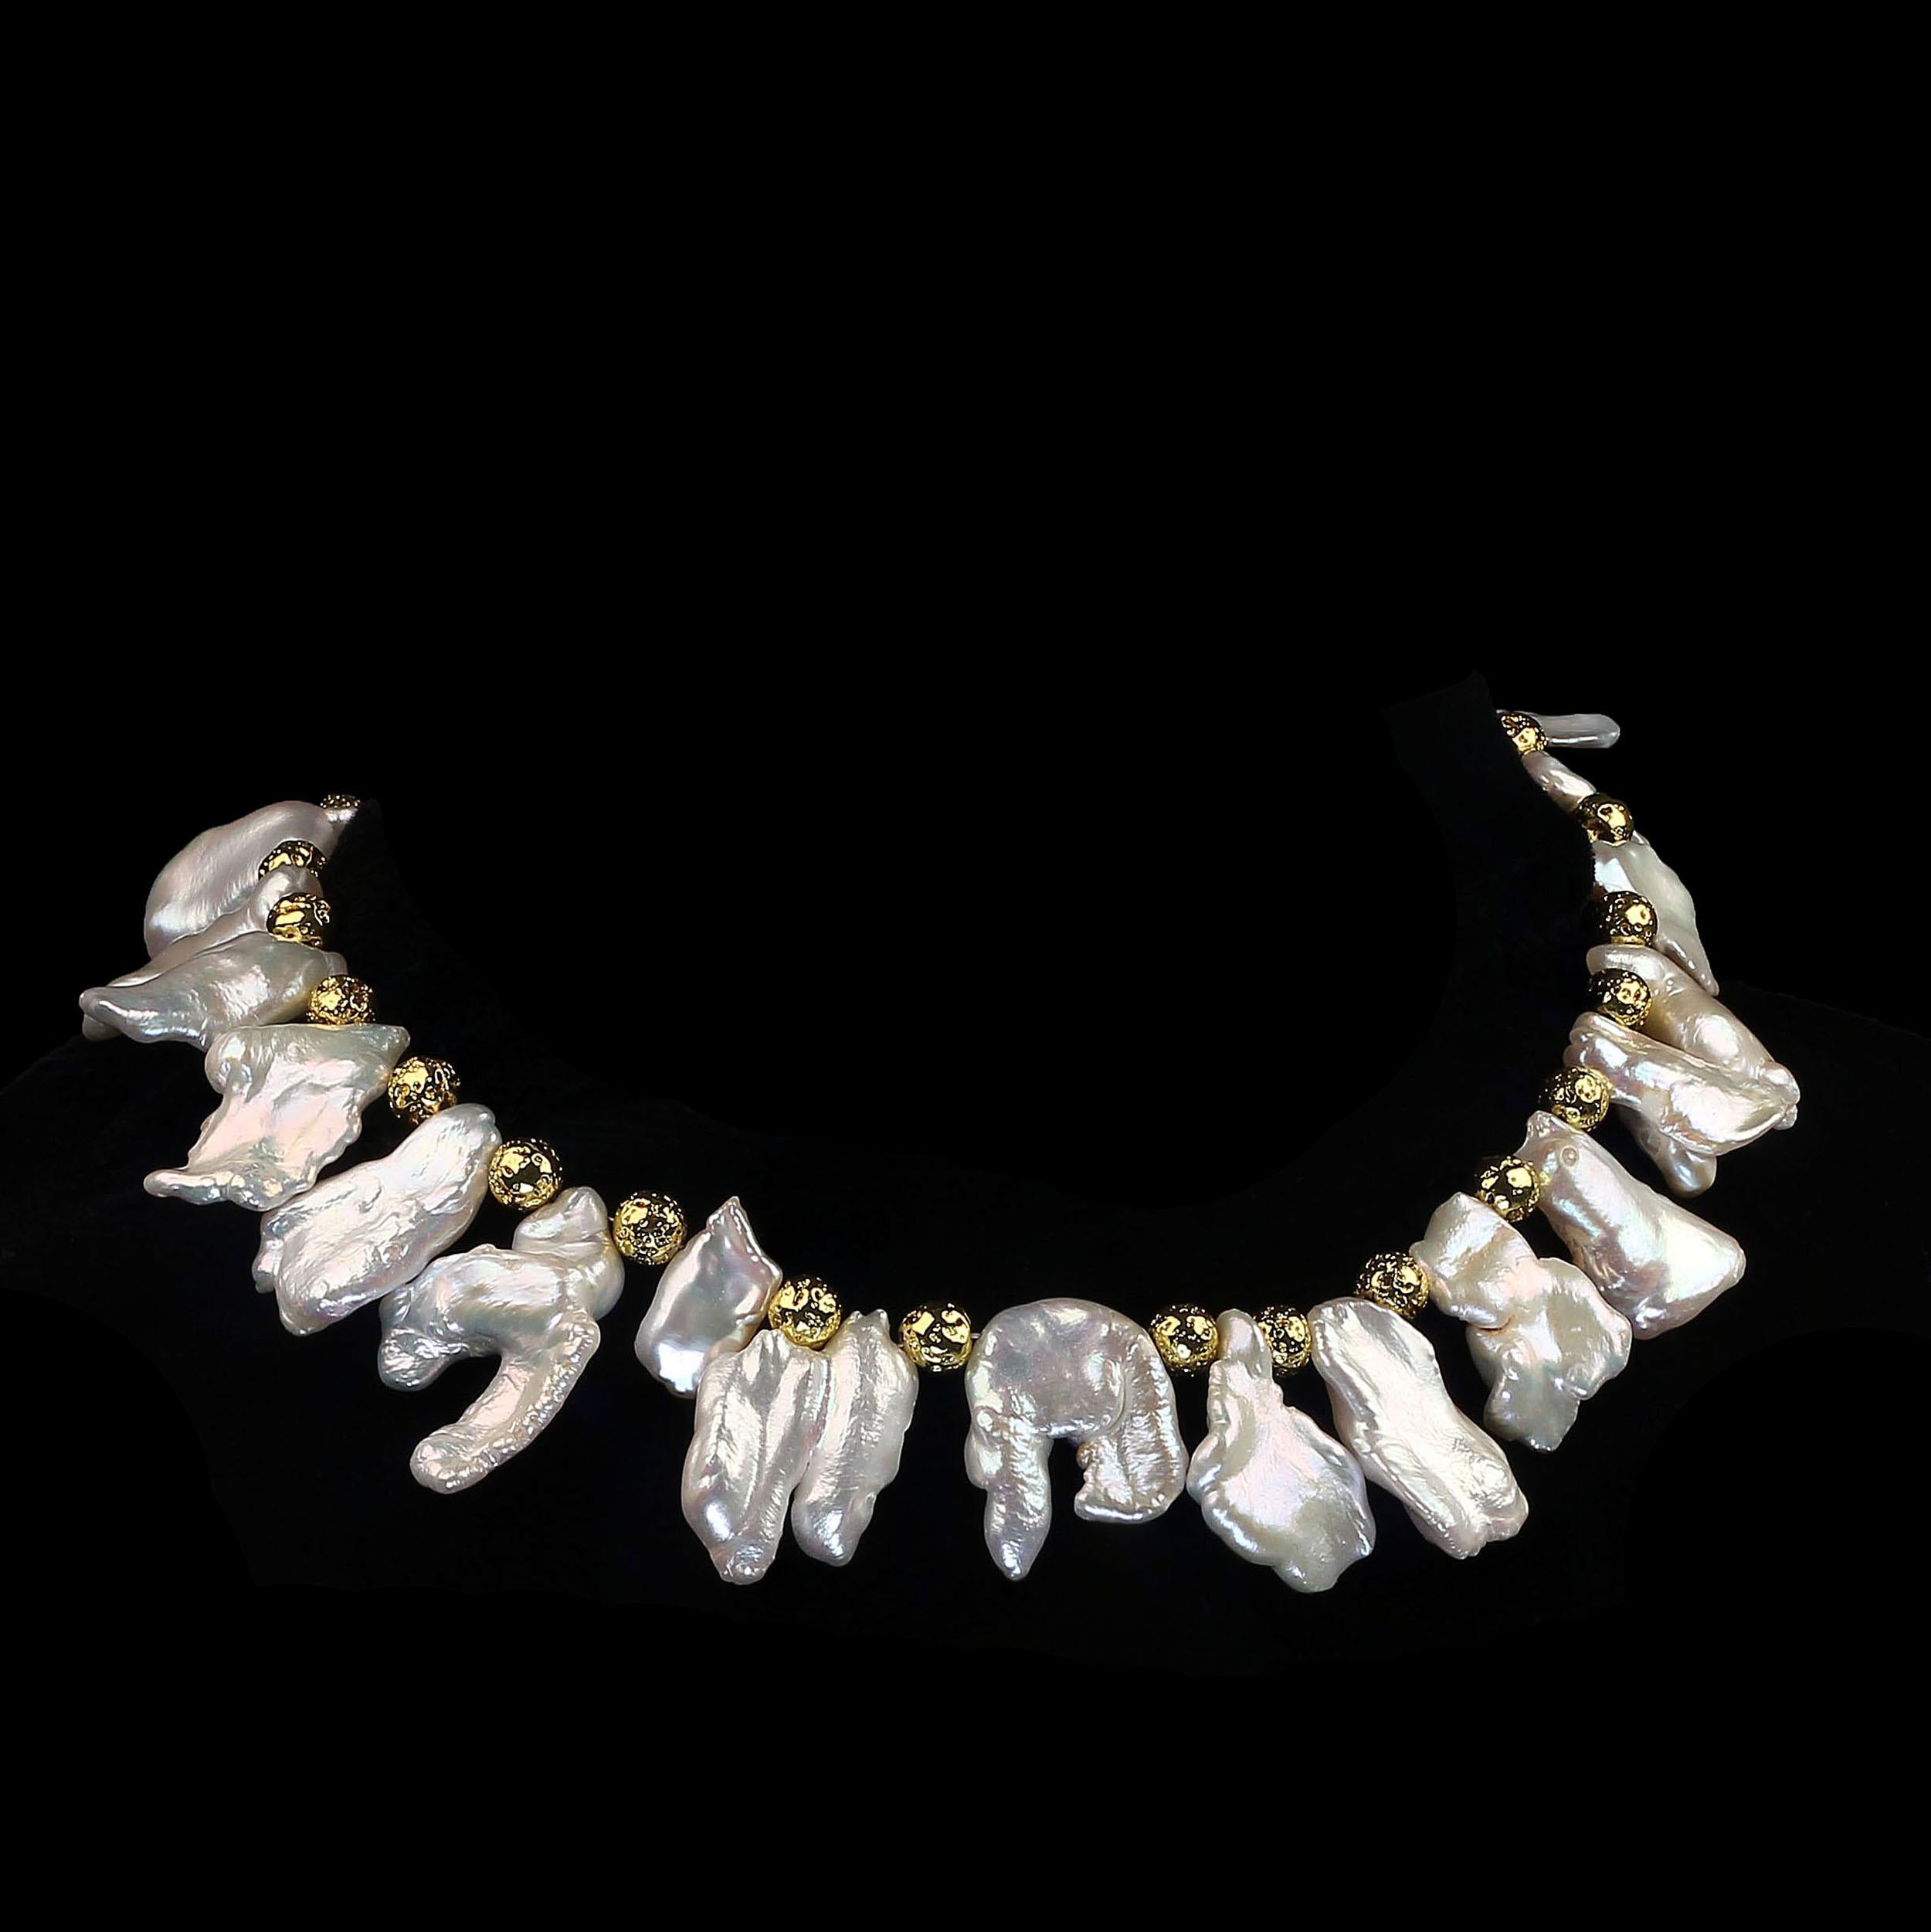 Artisan AJD 15 Inch White Free form Baroque Pearls Gold Accents Choker     Great Gift!! For Sale